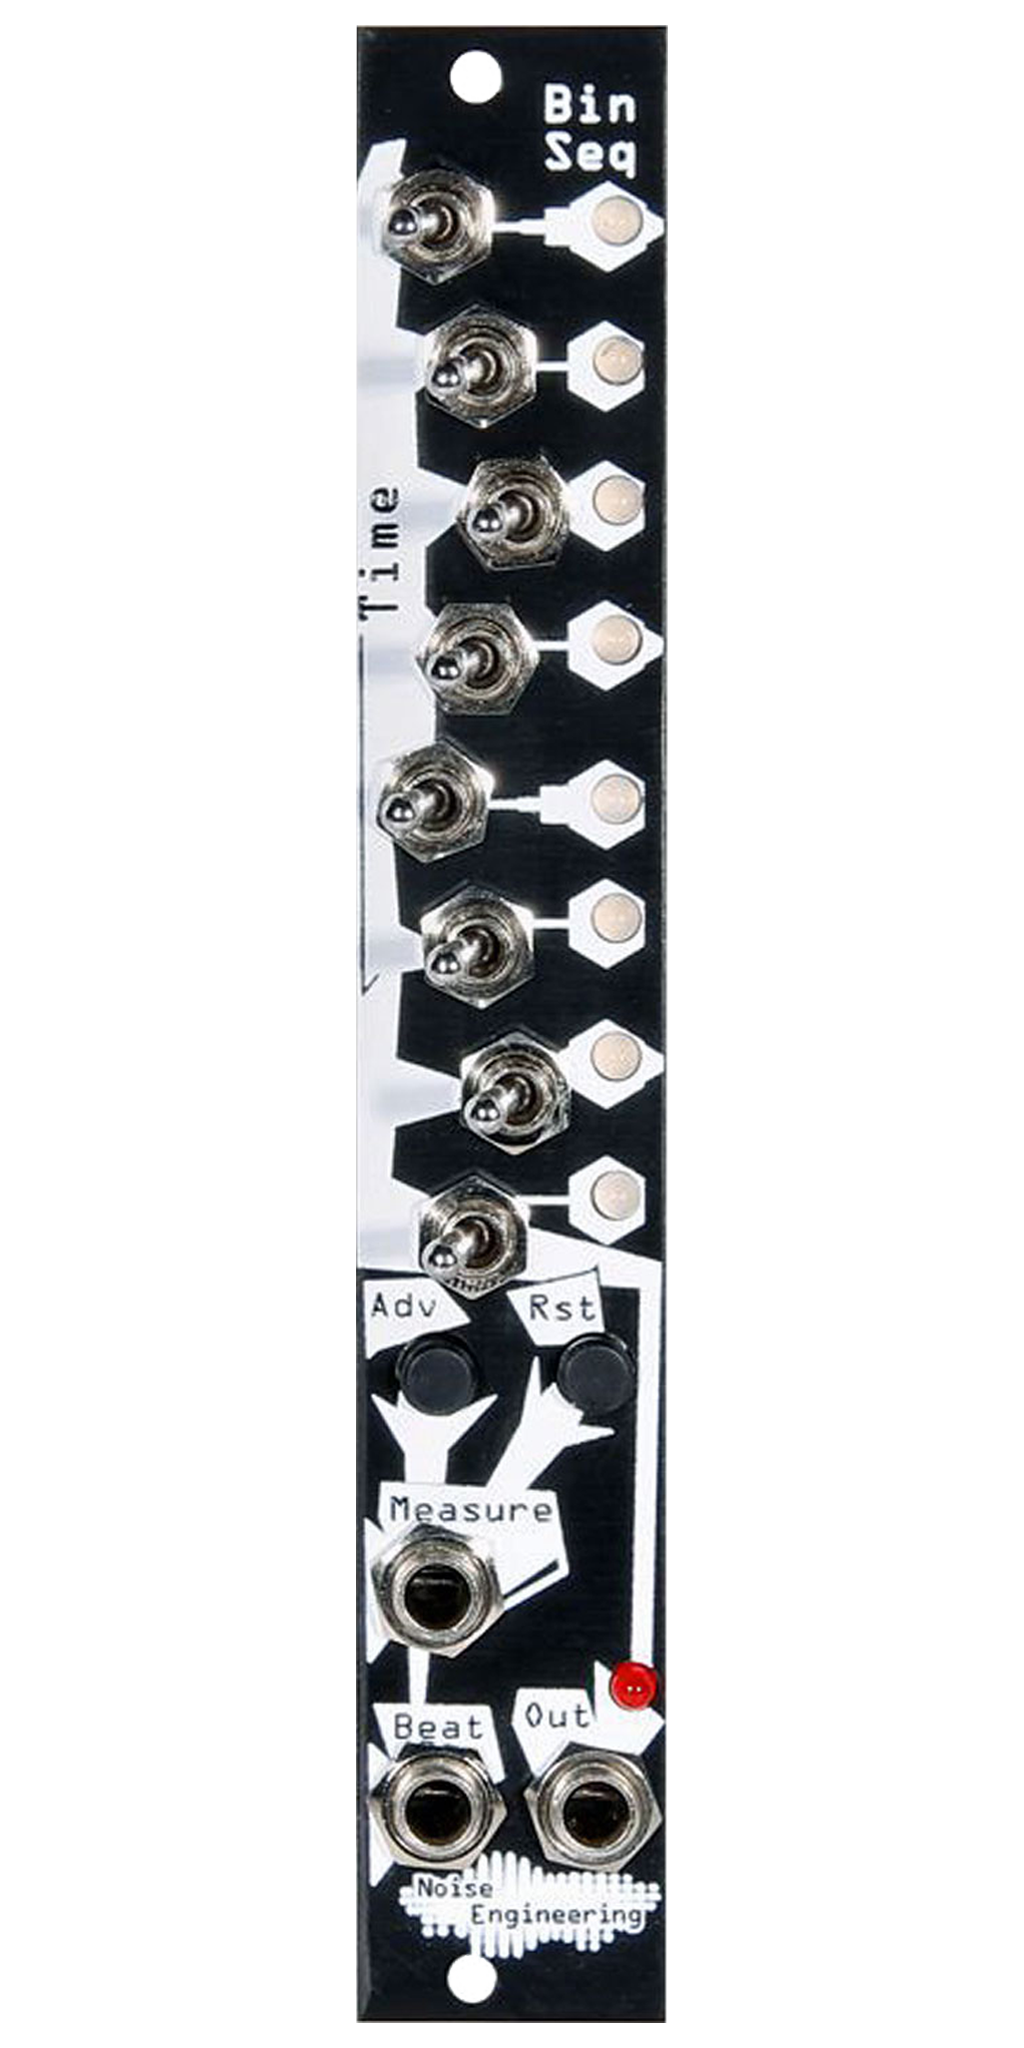 Compact 8-step trigger/gate sequencer with 8 switches in black | Bin Seq by Noise Engineering